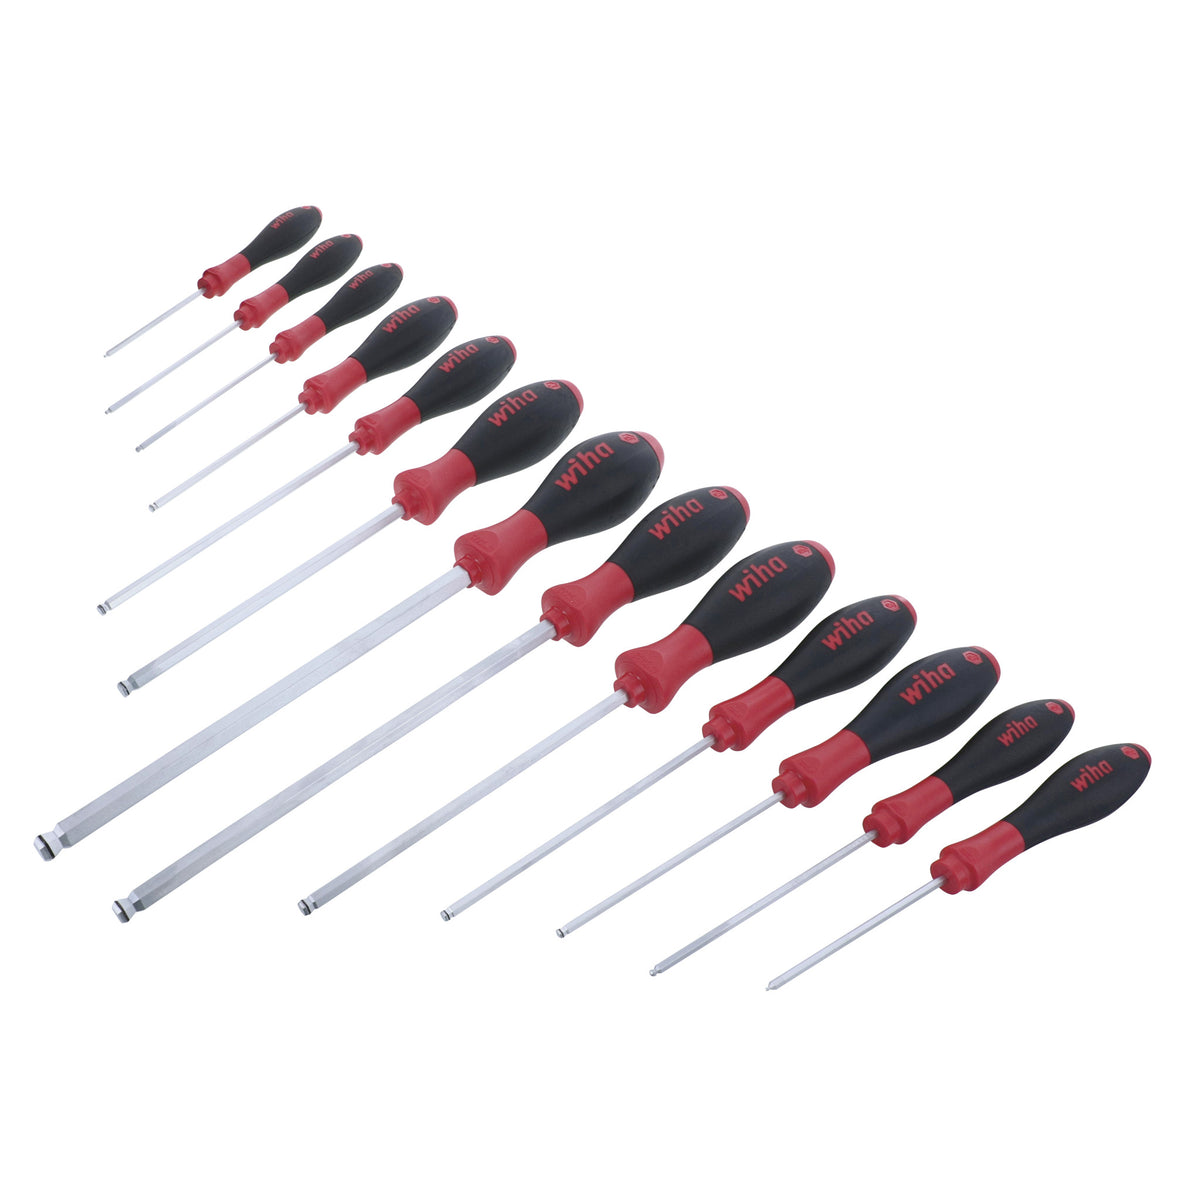 Wiha 36791 MagicRing® Ball End Driver 13 Pc. Set Made in Germany